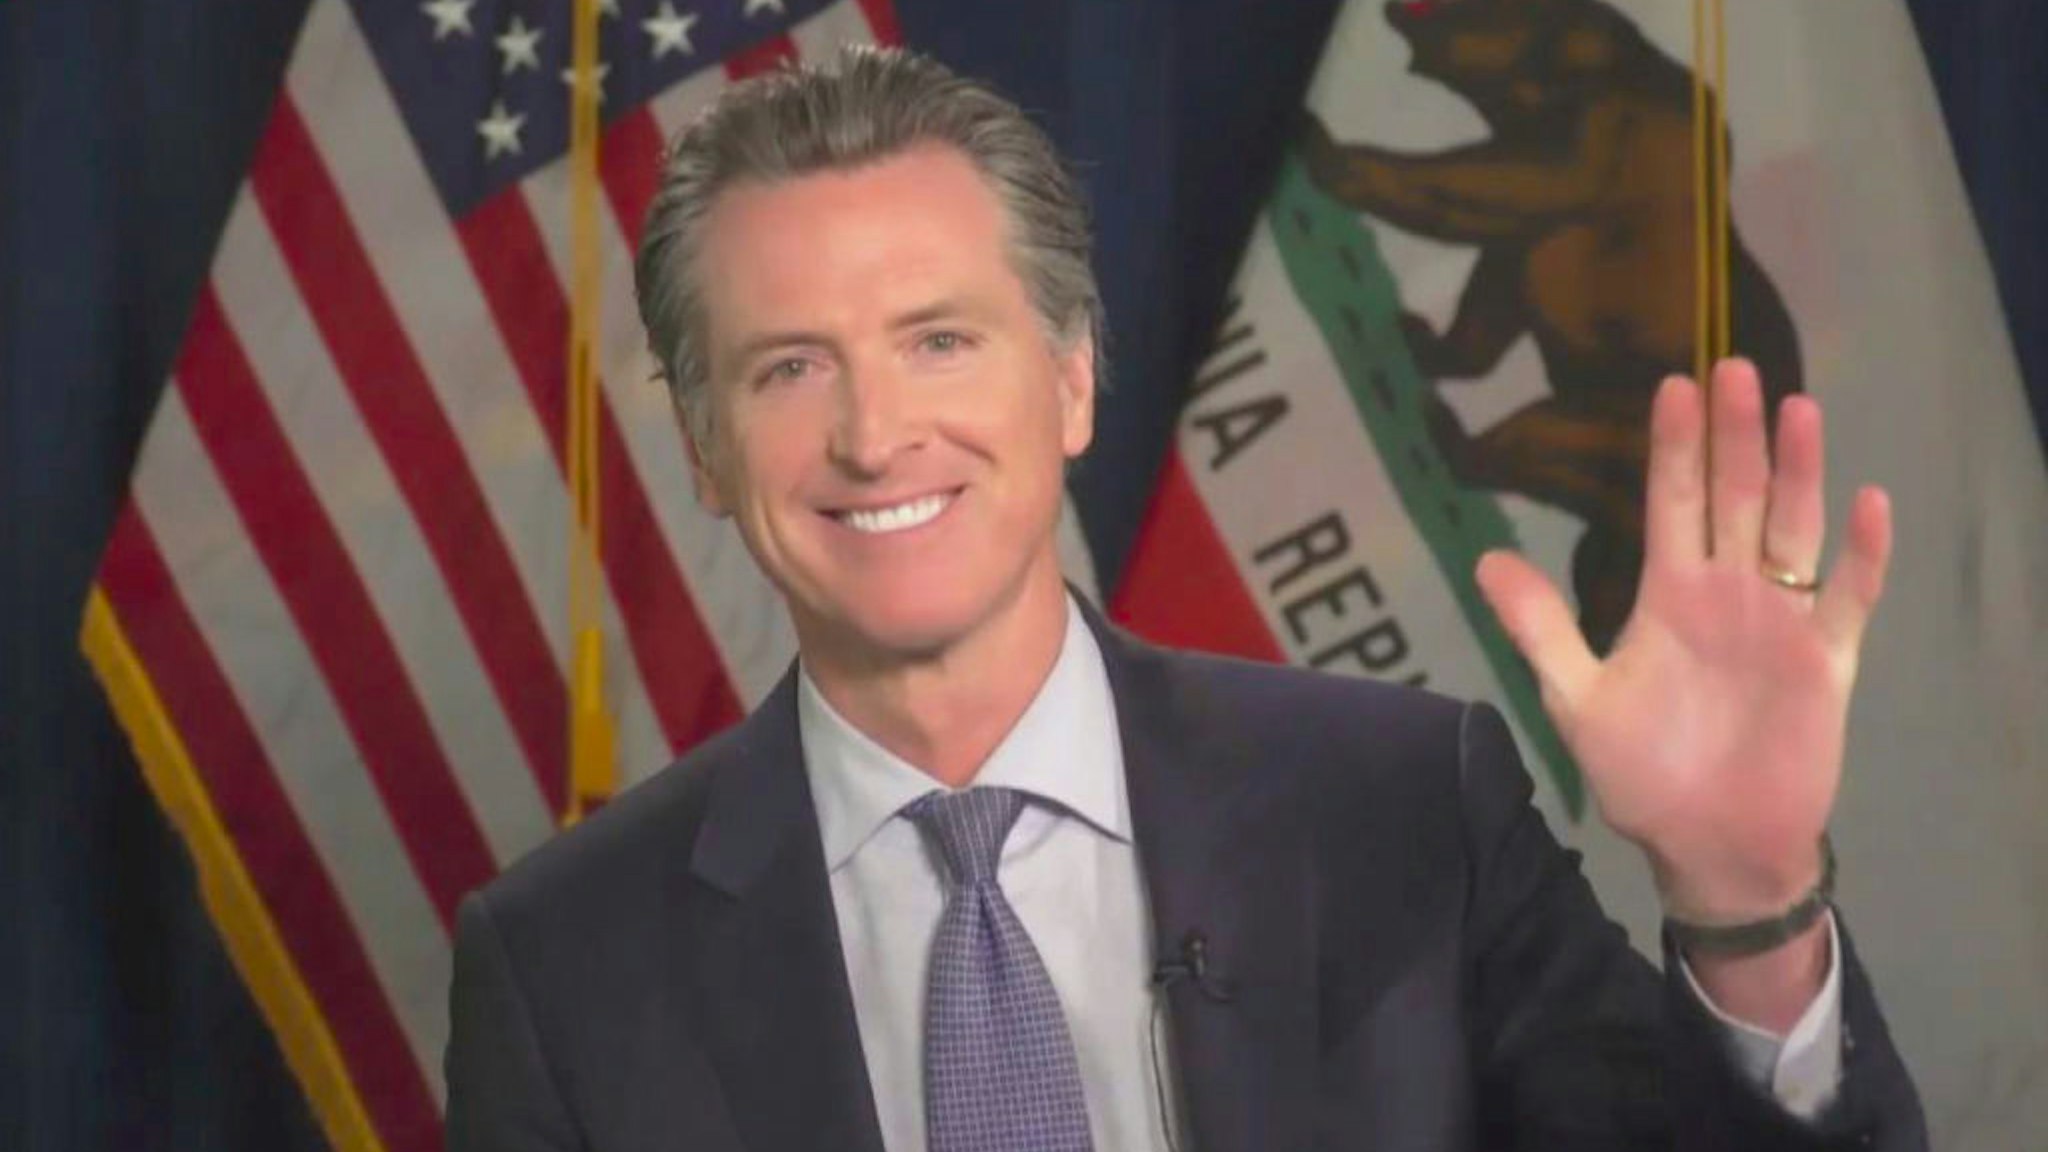 James chats with California Governor Gavin Newsom from his garage on THE LATE LATE SHOW WITH JAMES CORDEN, scheduled to air Wednesday June 17, 2020